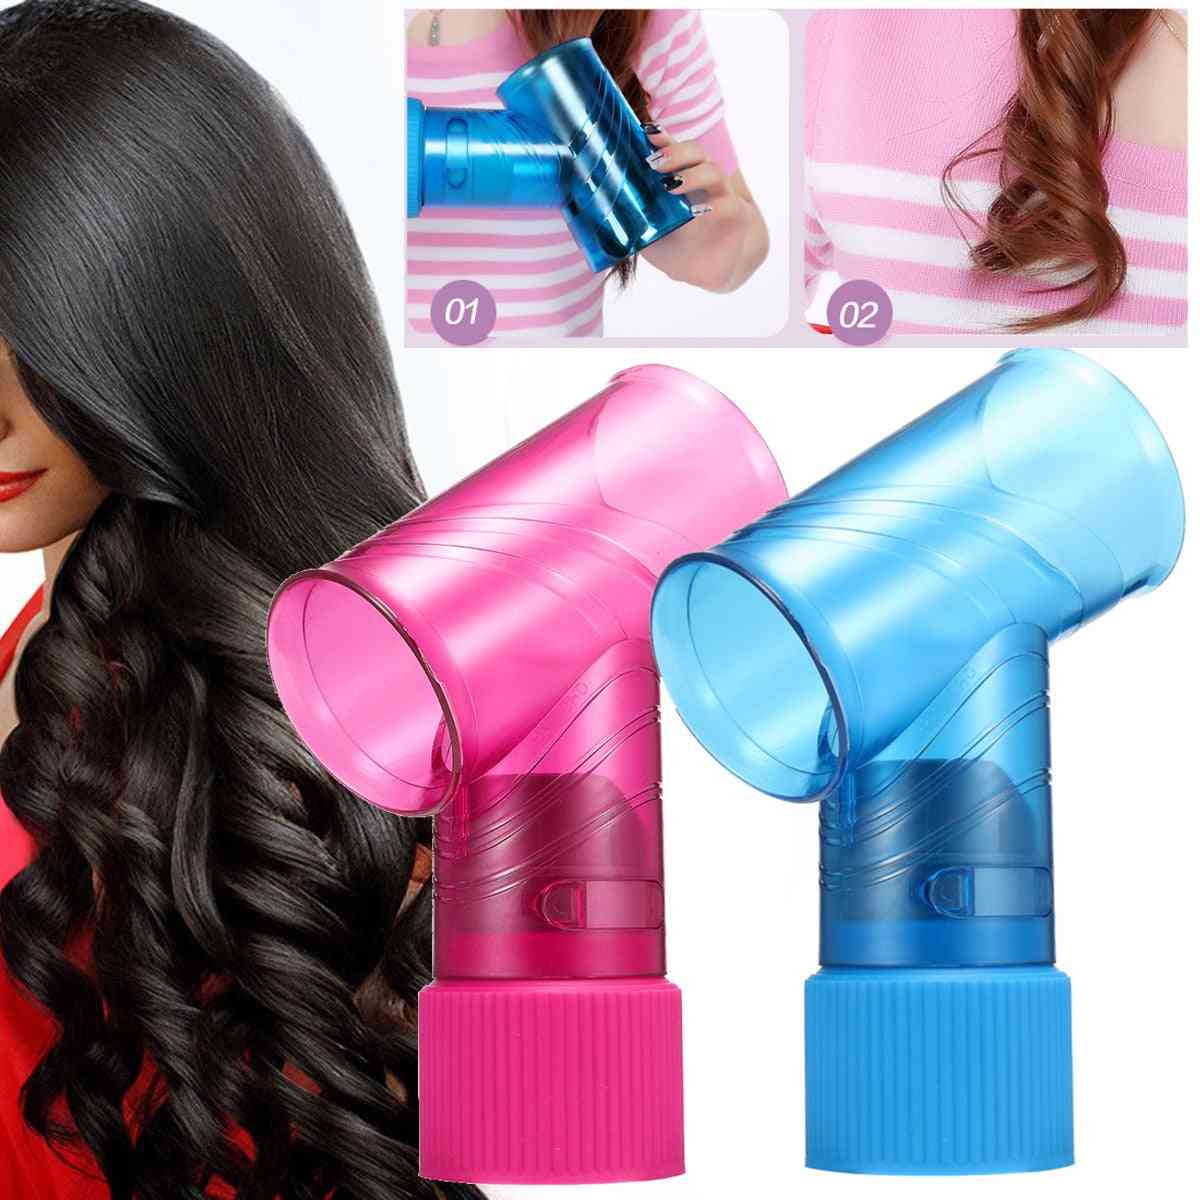 Portable Curly Hair Styling- Magic Spin Dryer Diffuser